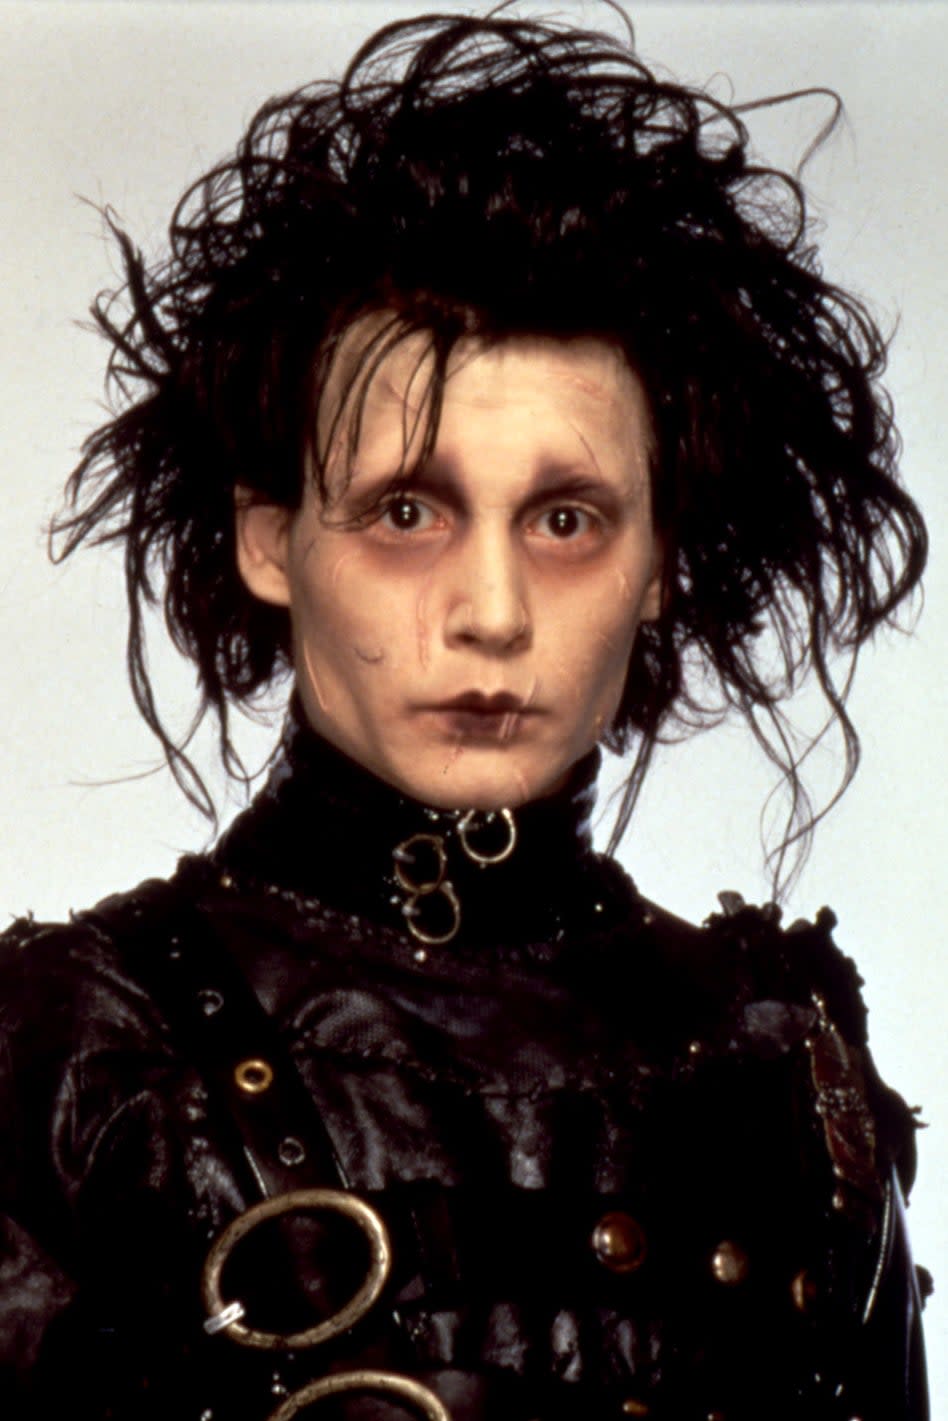 Edward Scissorhands in character with signature scissor hands and textured black outfit